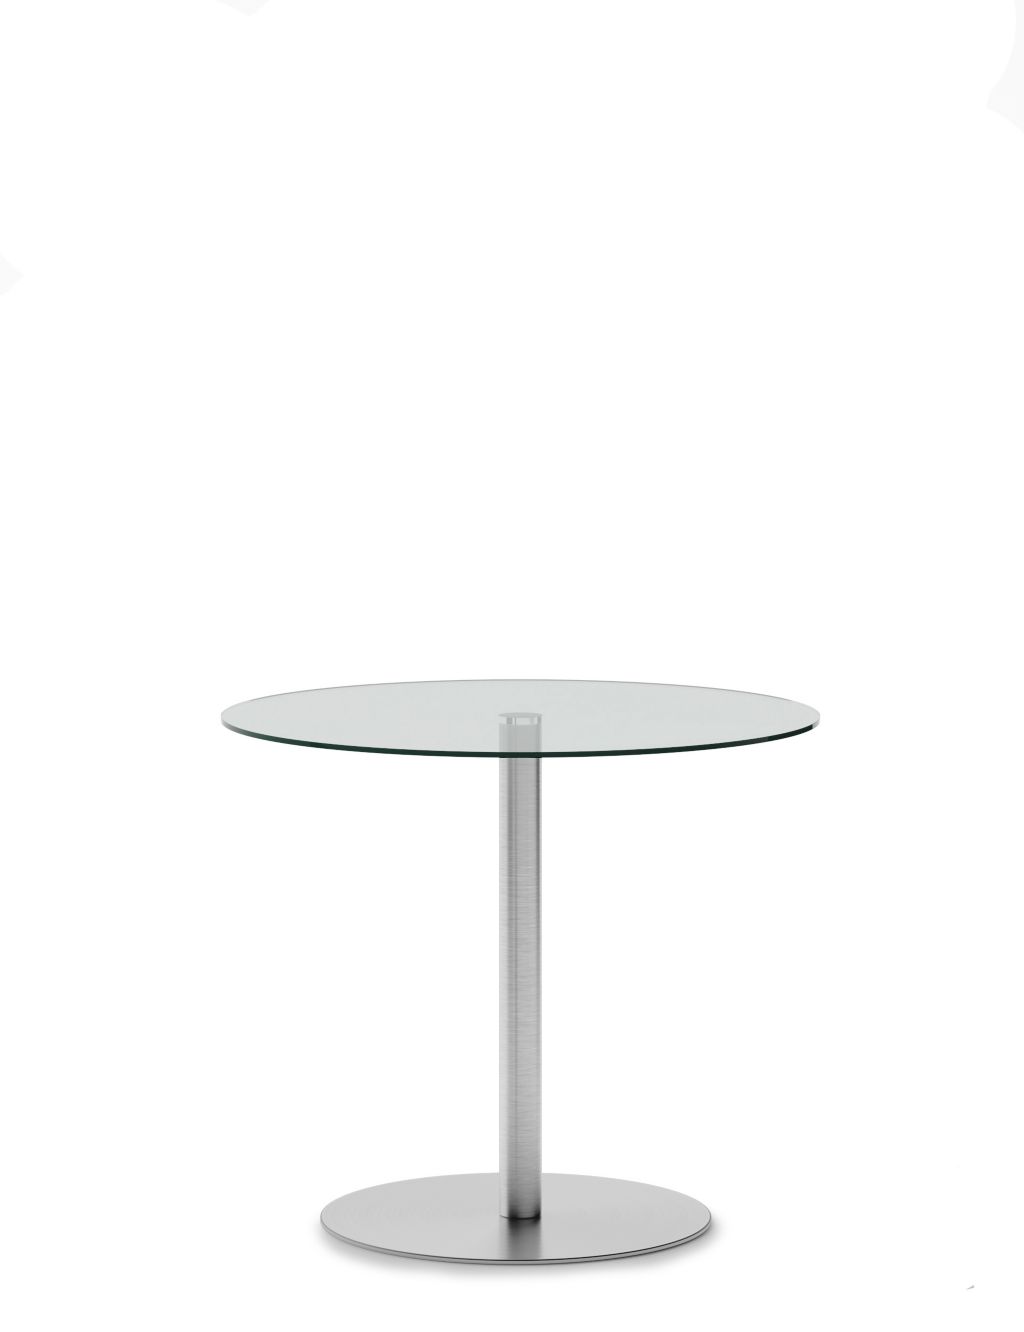 Huxley 4 Seater Pedestal Dining Table image 2